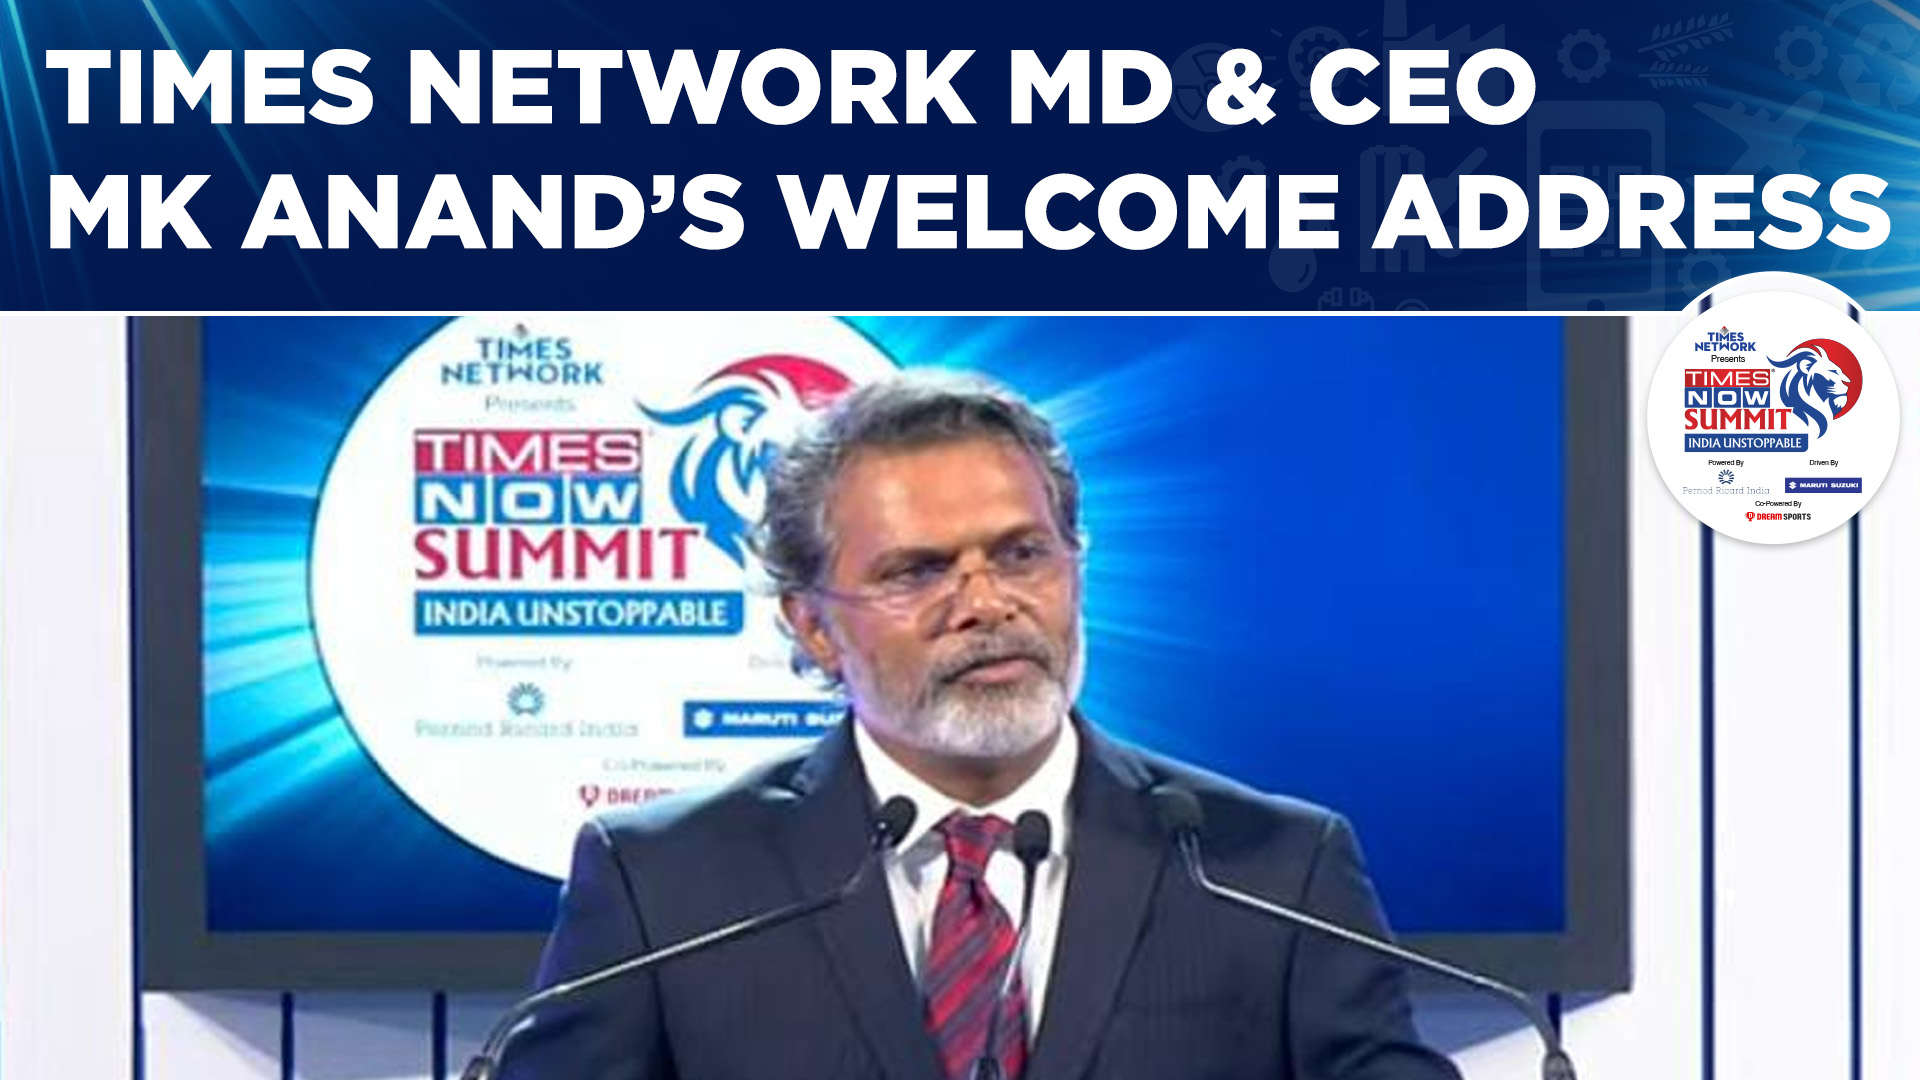 Times Network MD & CEO MK Anand Delivers Address At Times Now